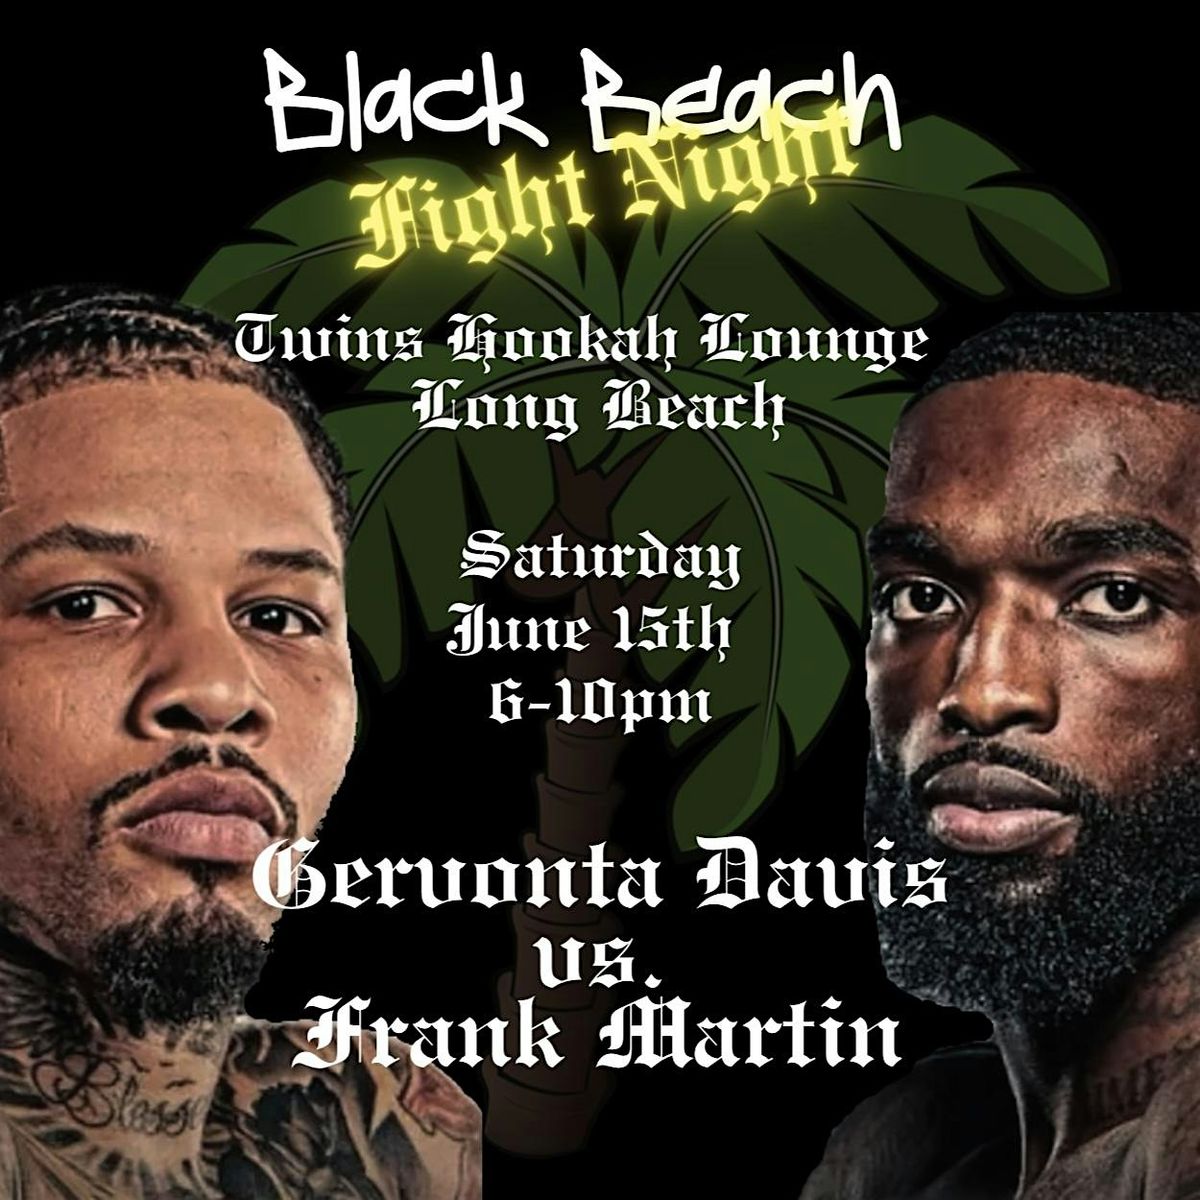 Black Beach Fight Night x R&B After Party!